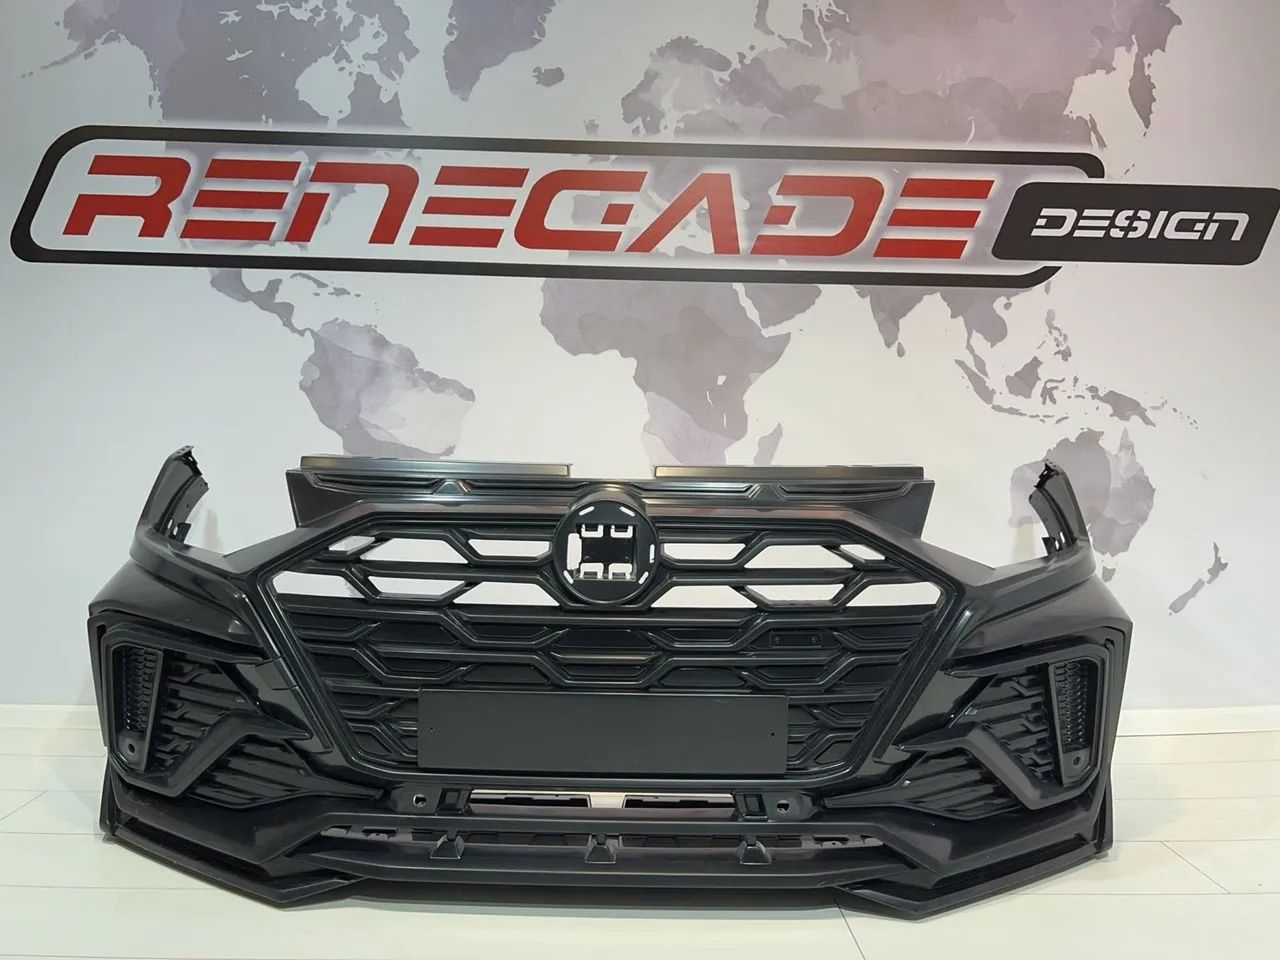 Check our price and buy Renegade Design body kit for  Volkswagen Tiguan